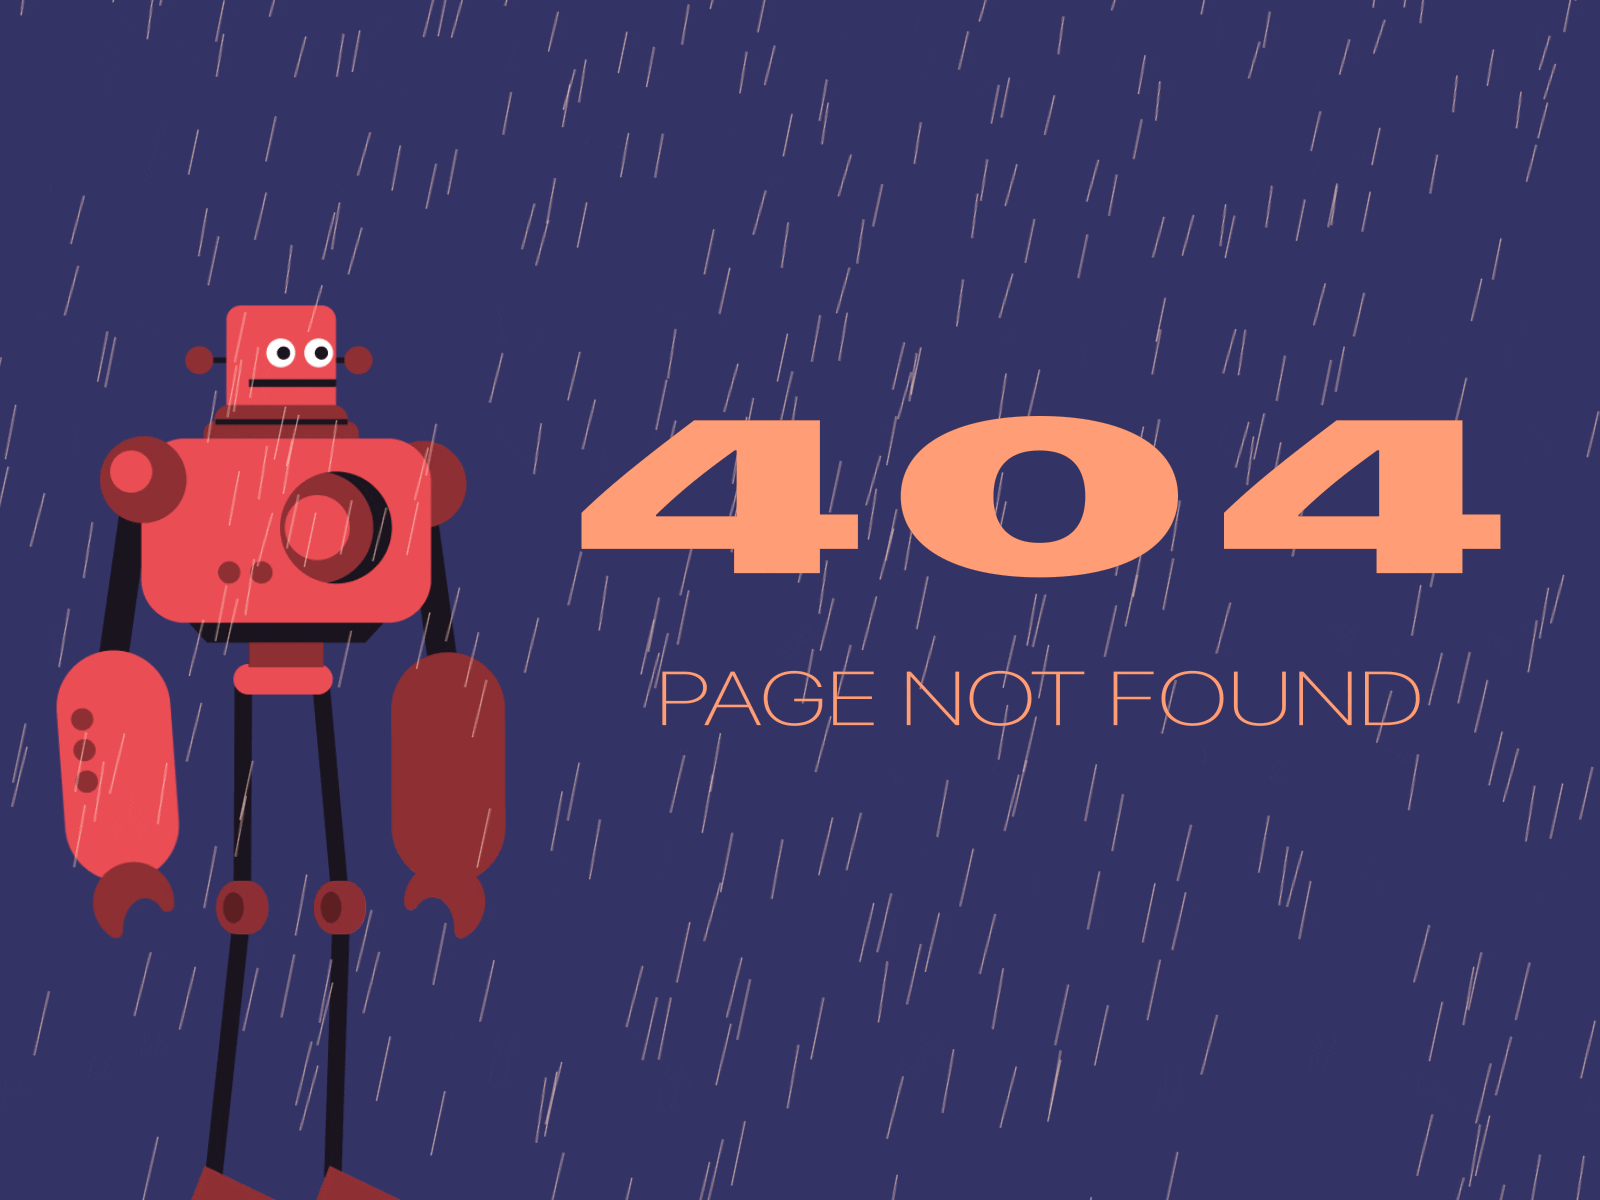 Page 404 — Not Found